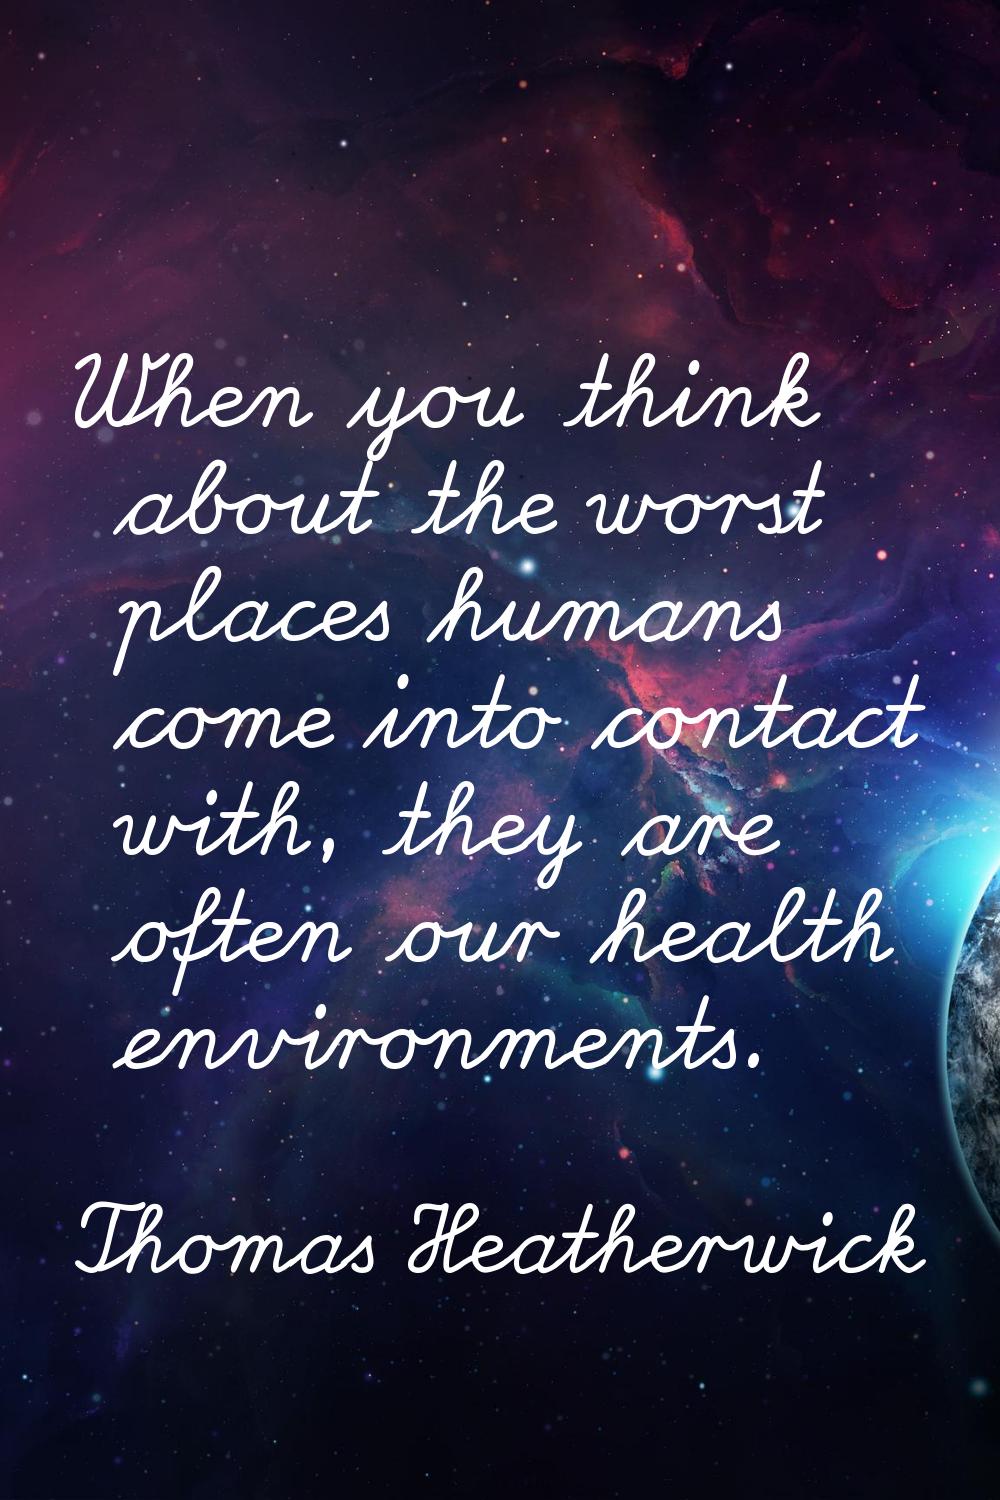 When you think about the worst places humans come into contact with, they are often our health envi